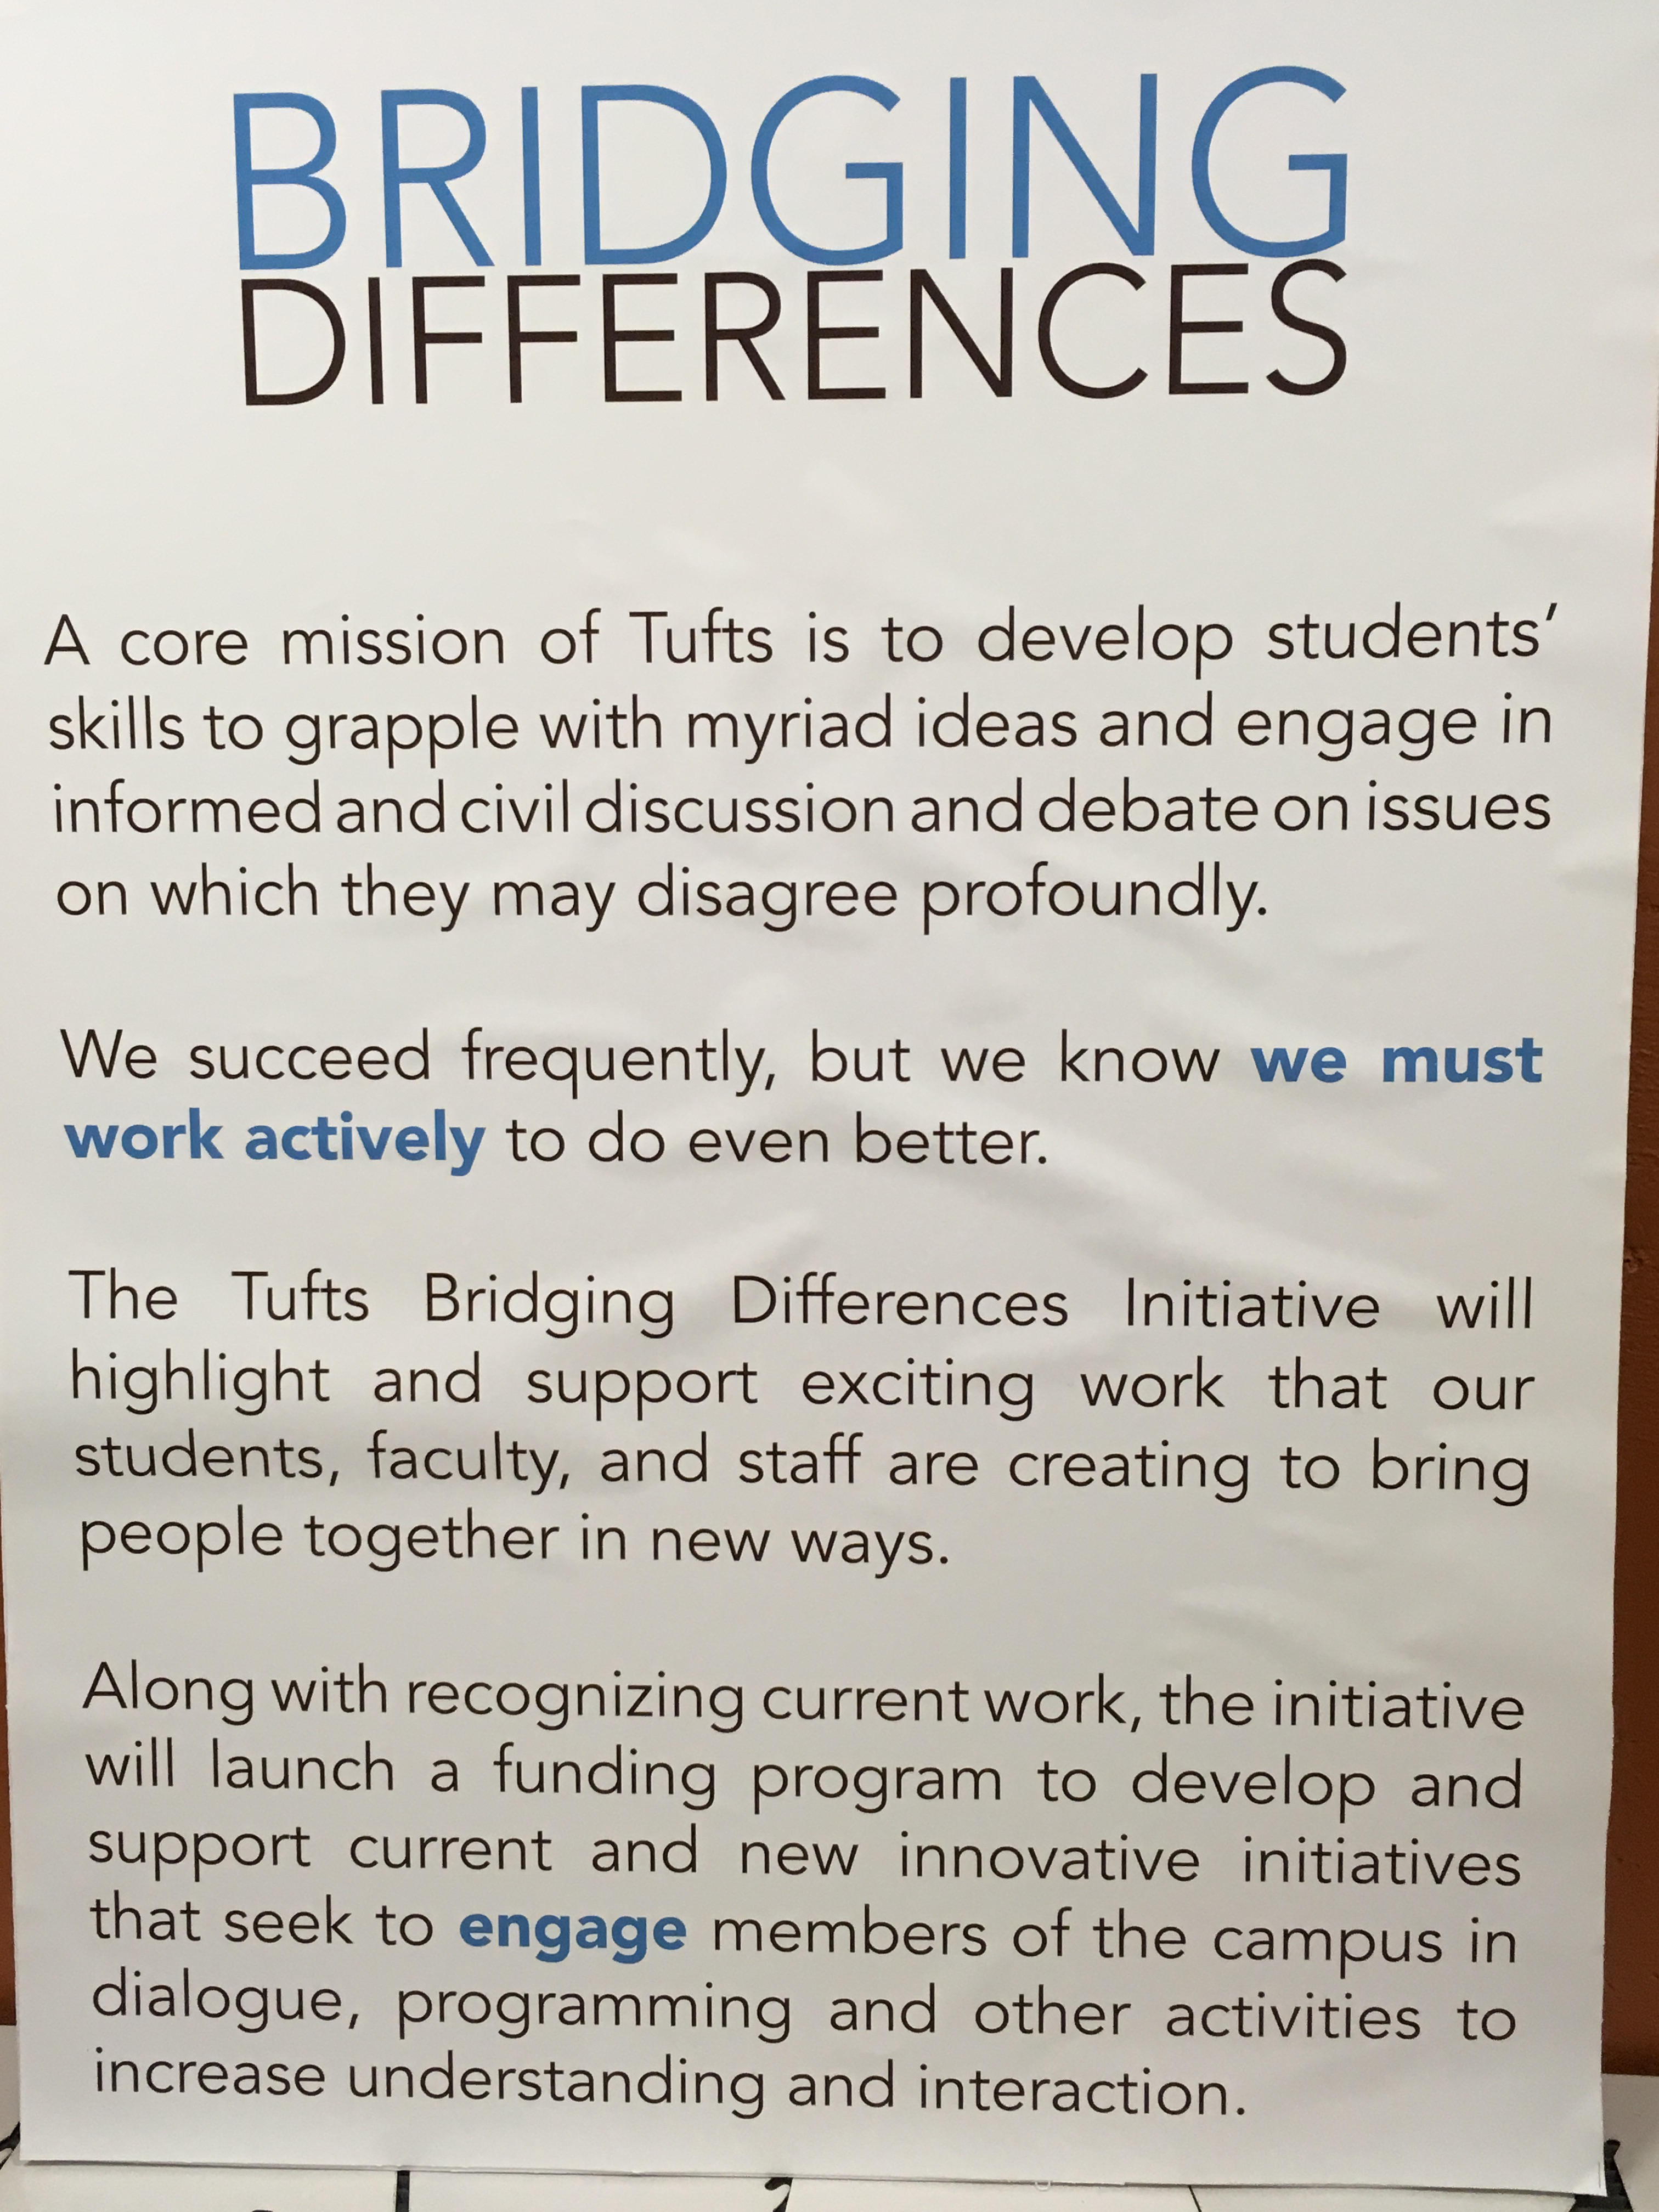 Bridging Differences, an all-campus Tufts initiative, comes to Ginn Library